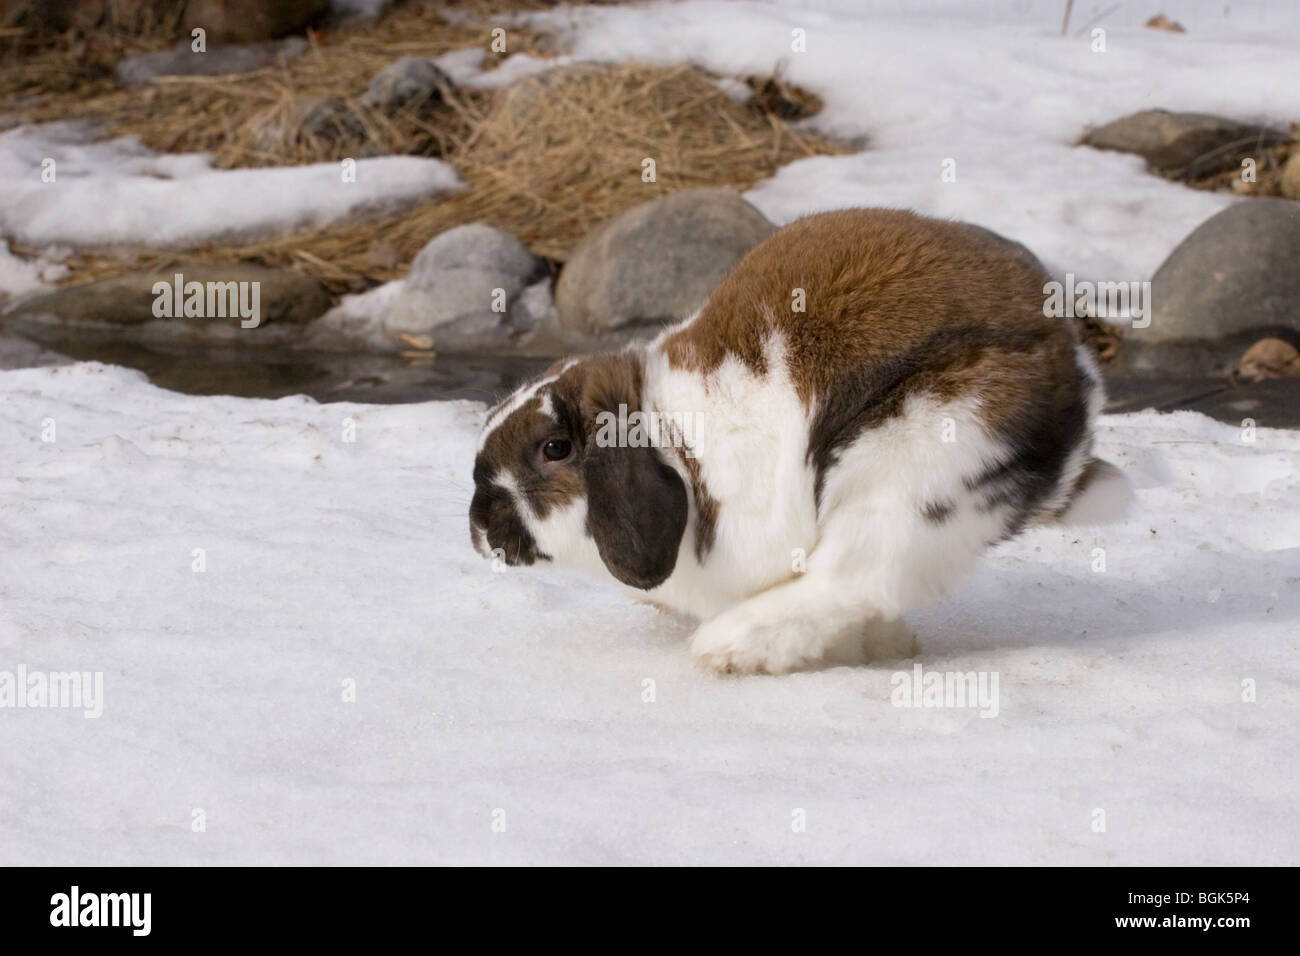 Holland Lop pet dwarf rabbit hopping through a backyard while playing outdoors in winter Stock Photo